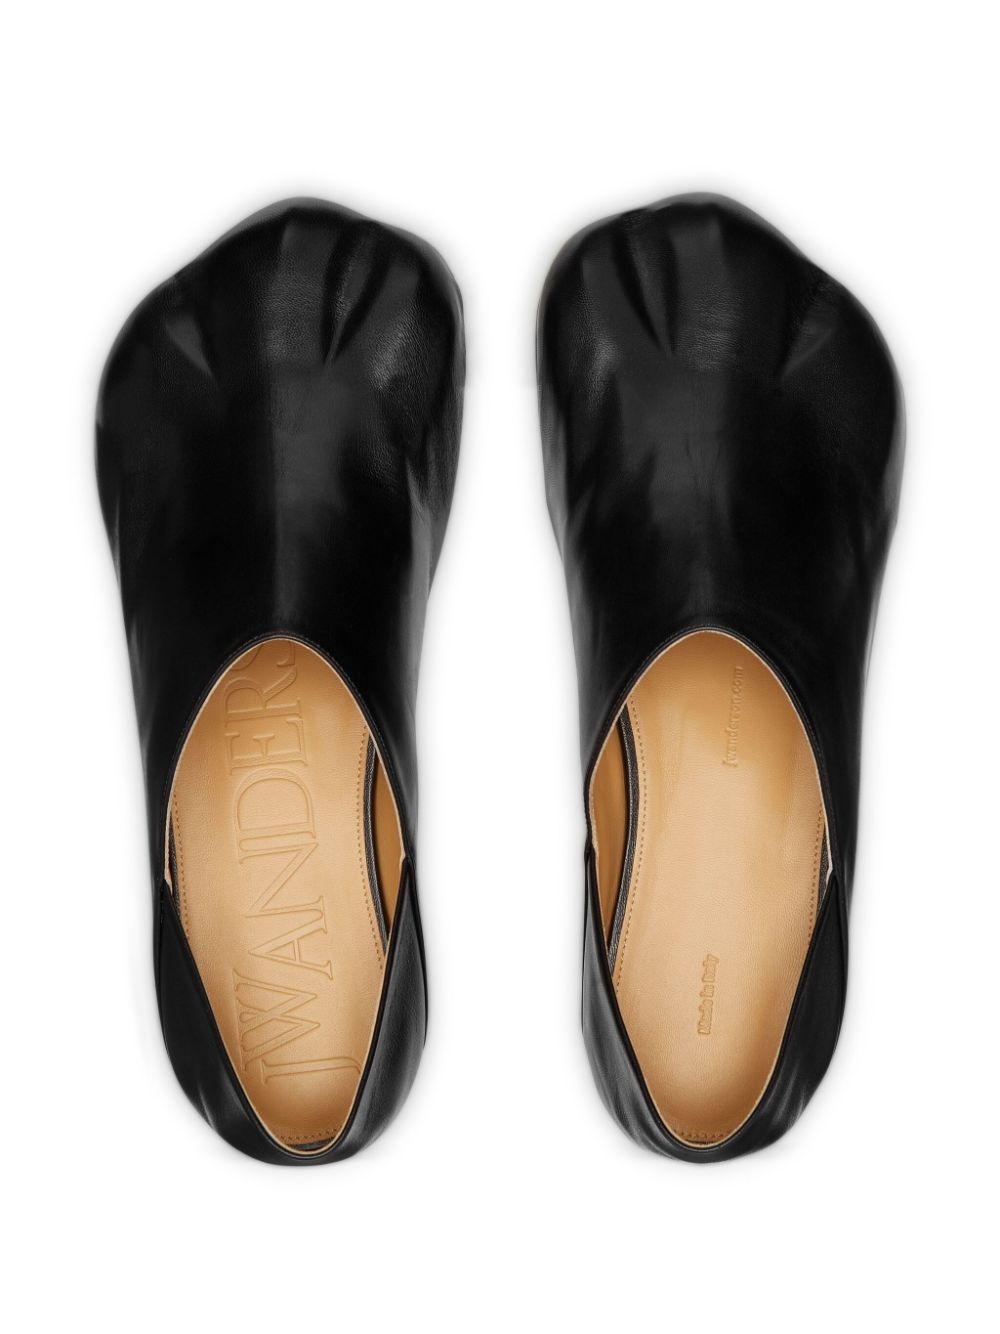 Paw leather loafers - 4